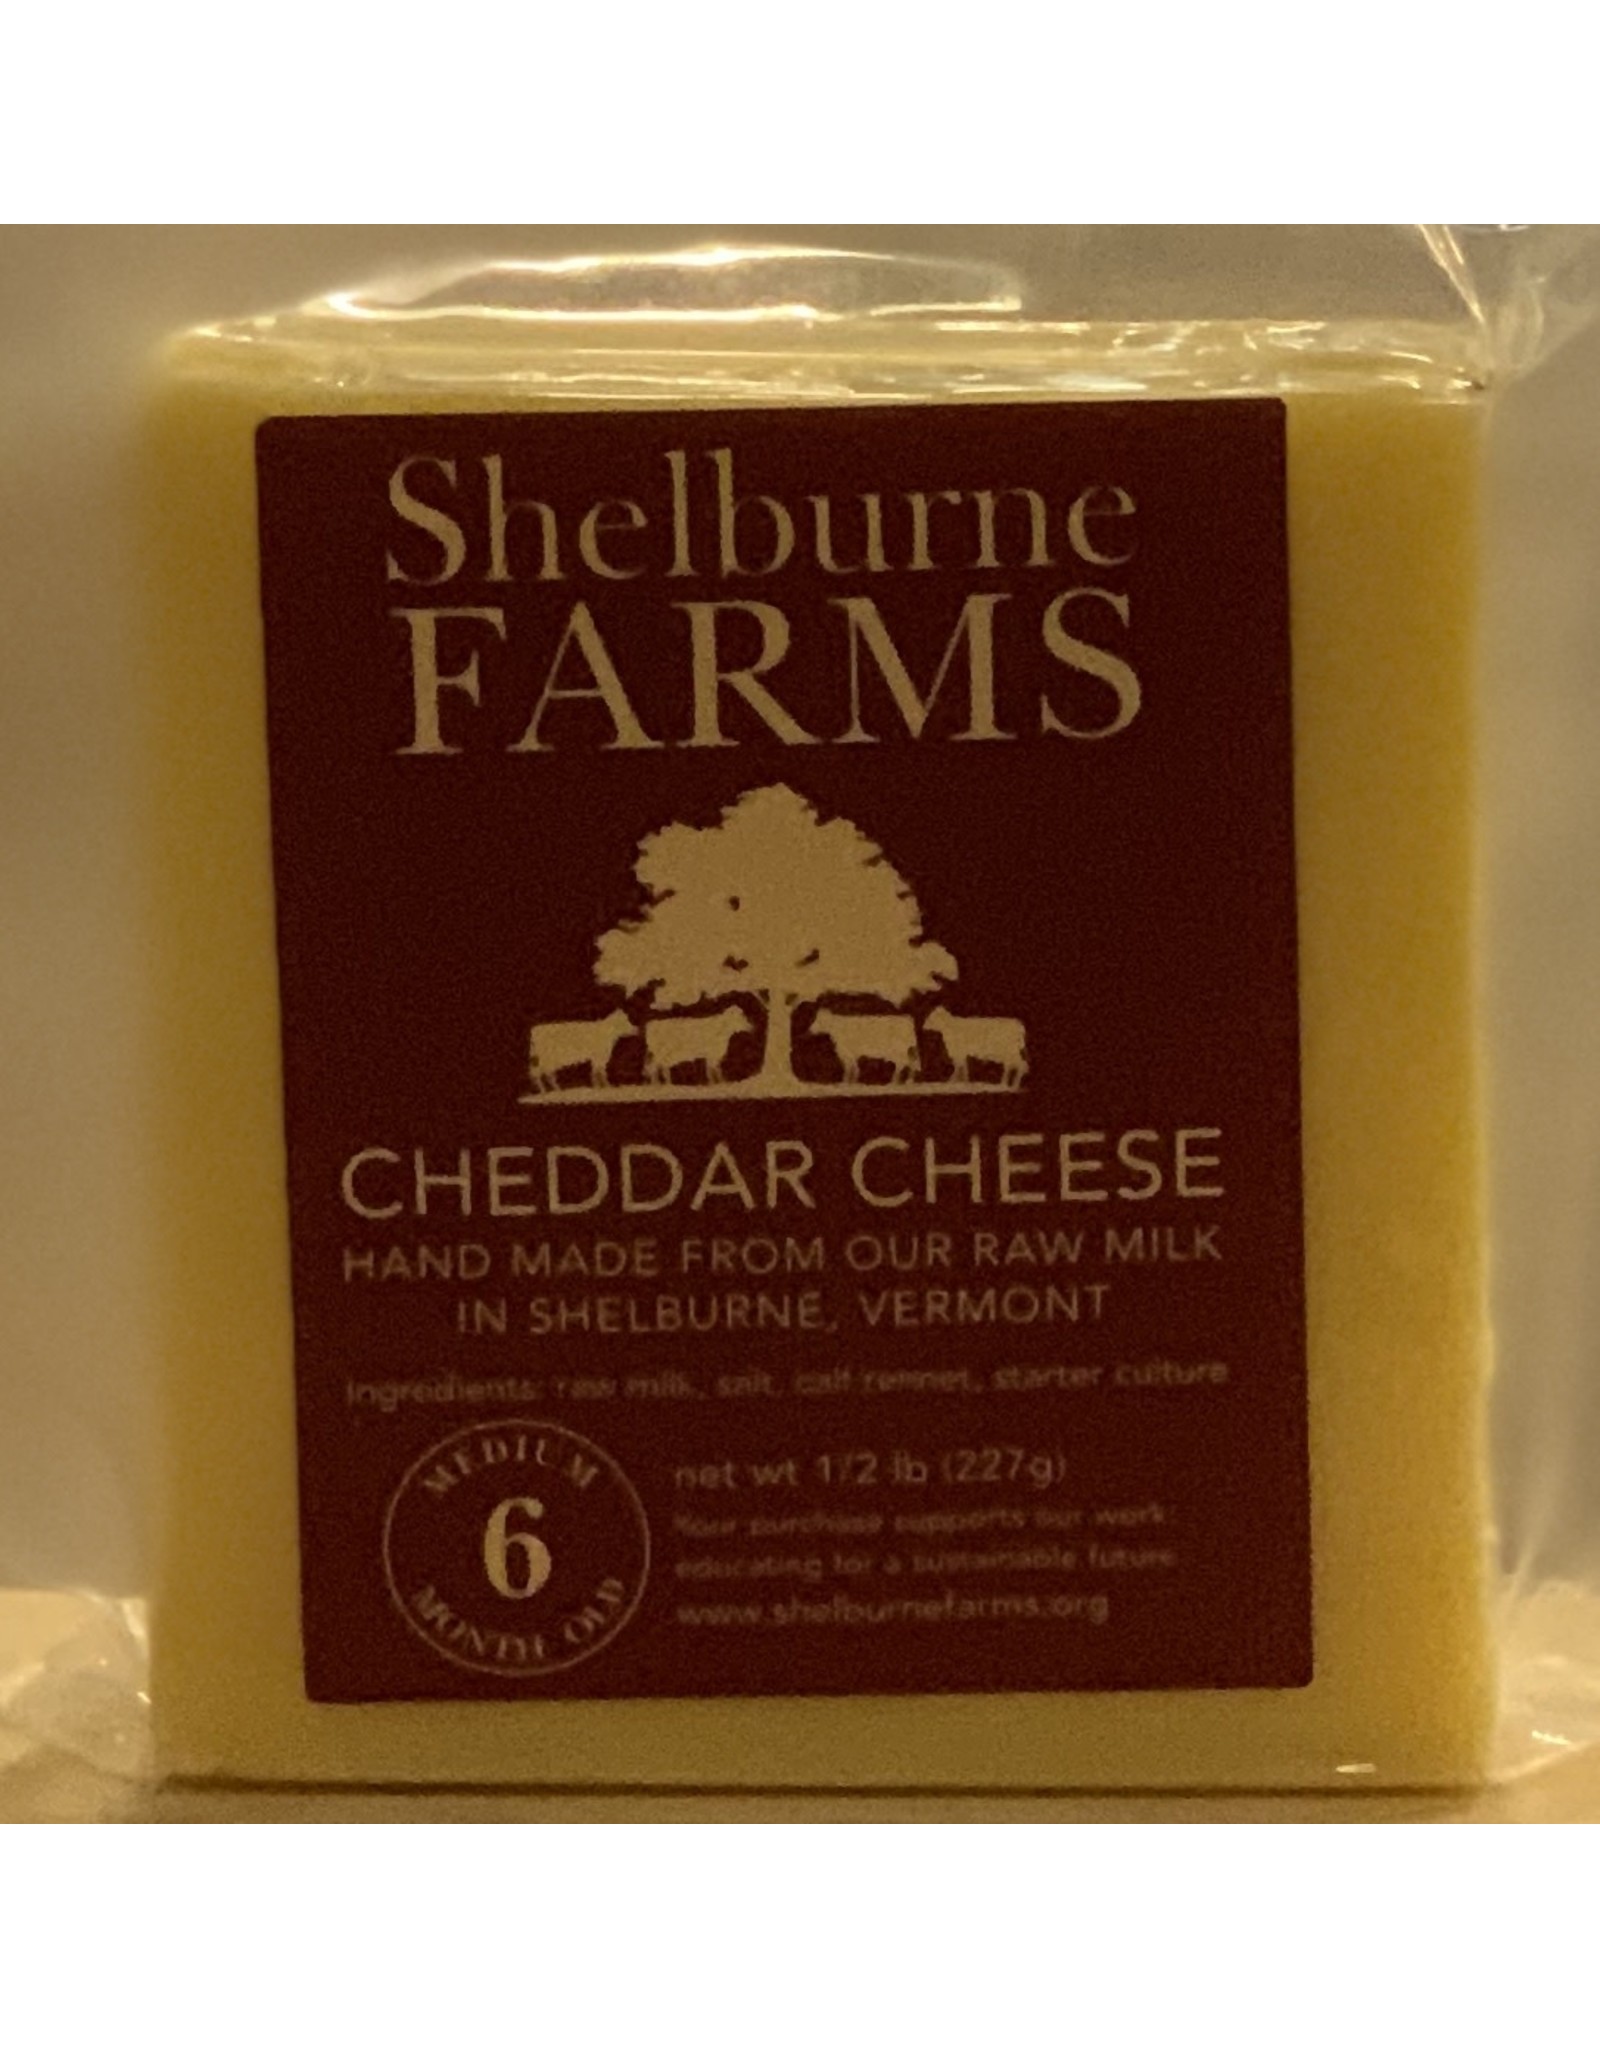 Cheese Shelburne Farms Cheddar Cheese 6 month - Shelburne, Vermont